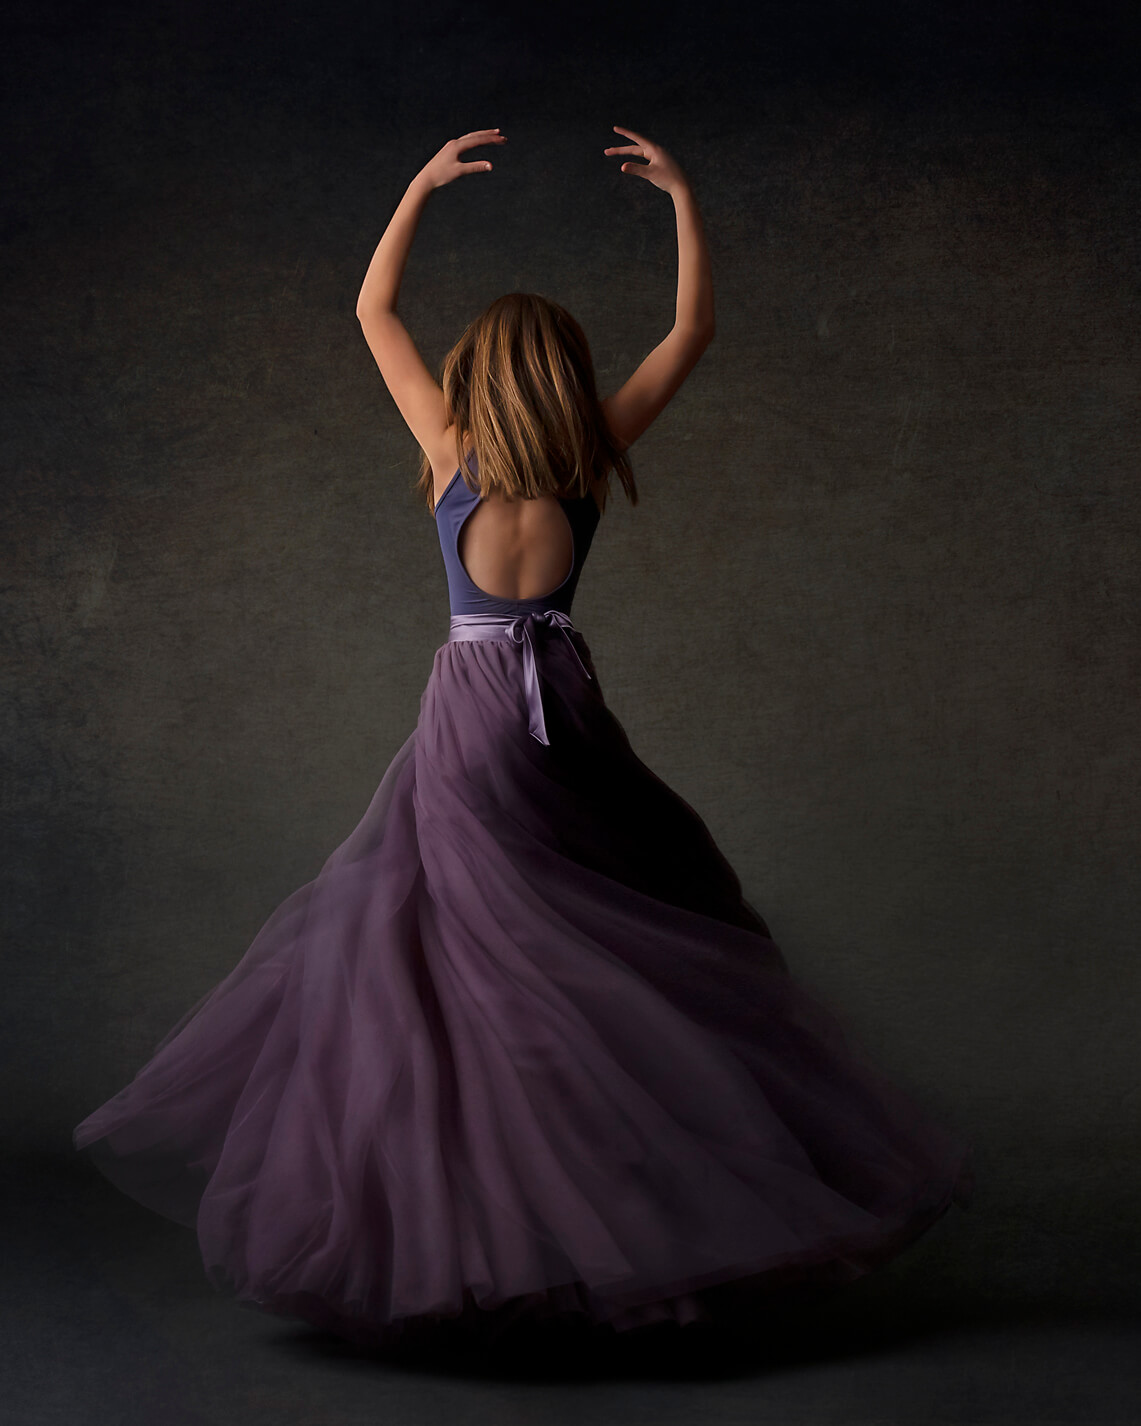 Studio portrait of the back of a L.A. dancer with arms up in purple skirt